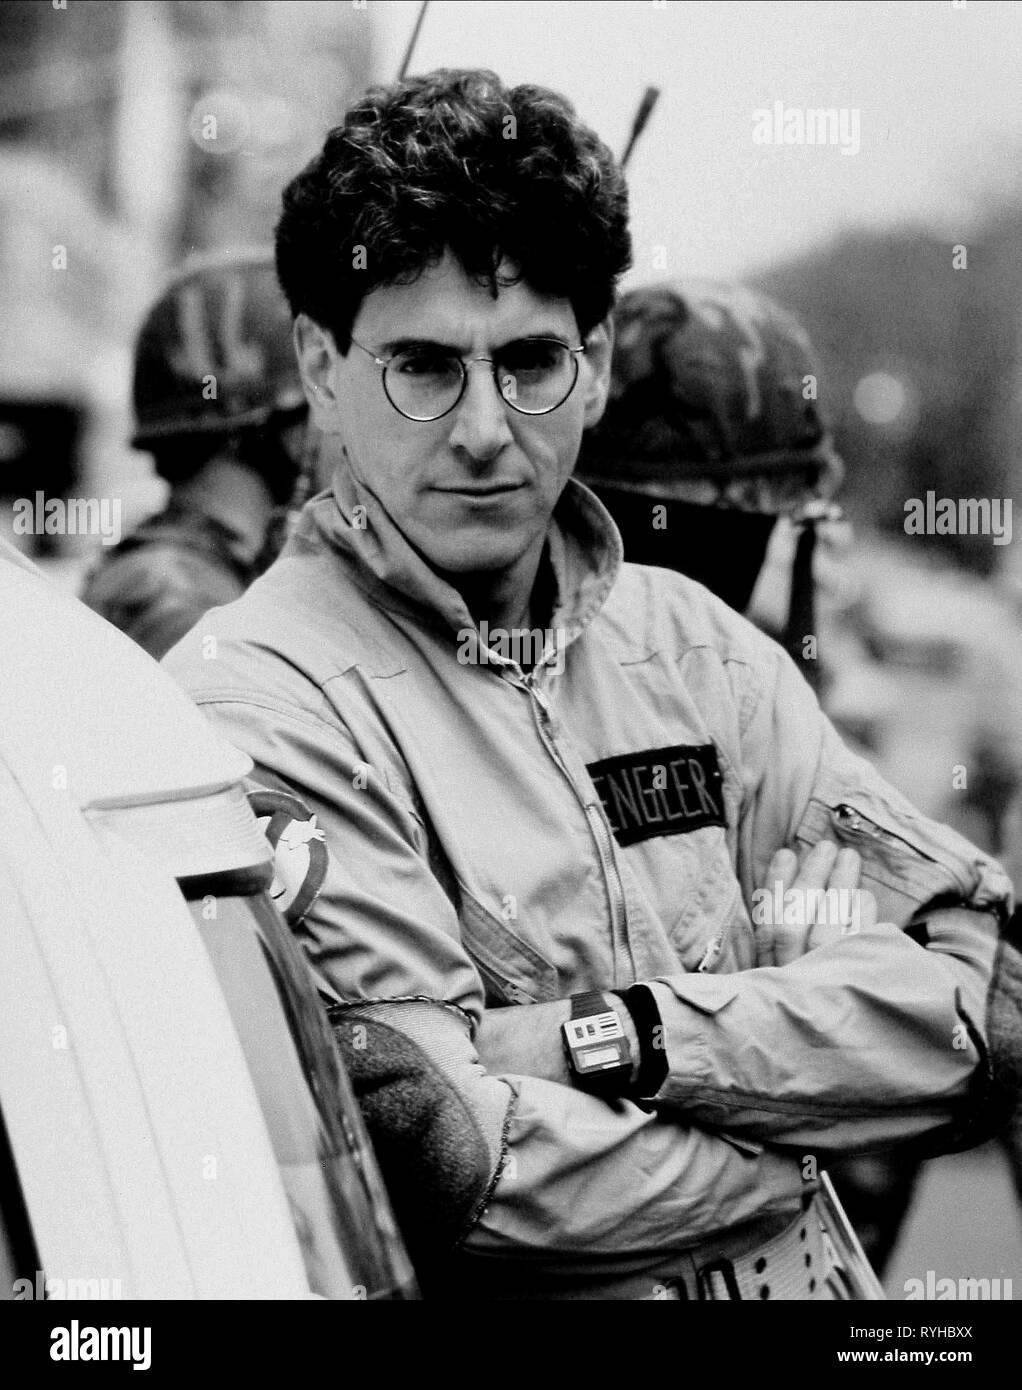 HAROLD RAMIS, Ghostbusters, 1984 Banque D'Images